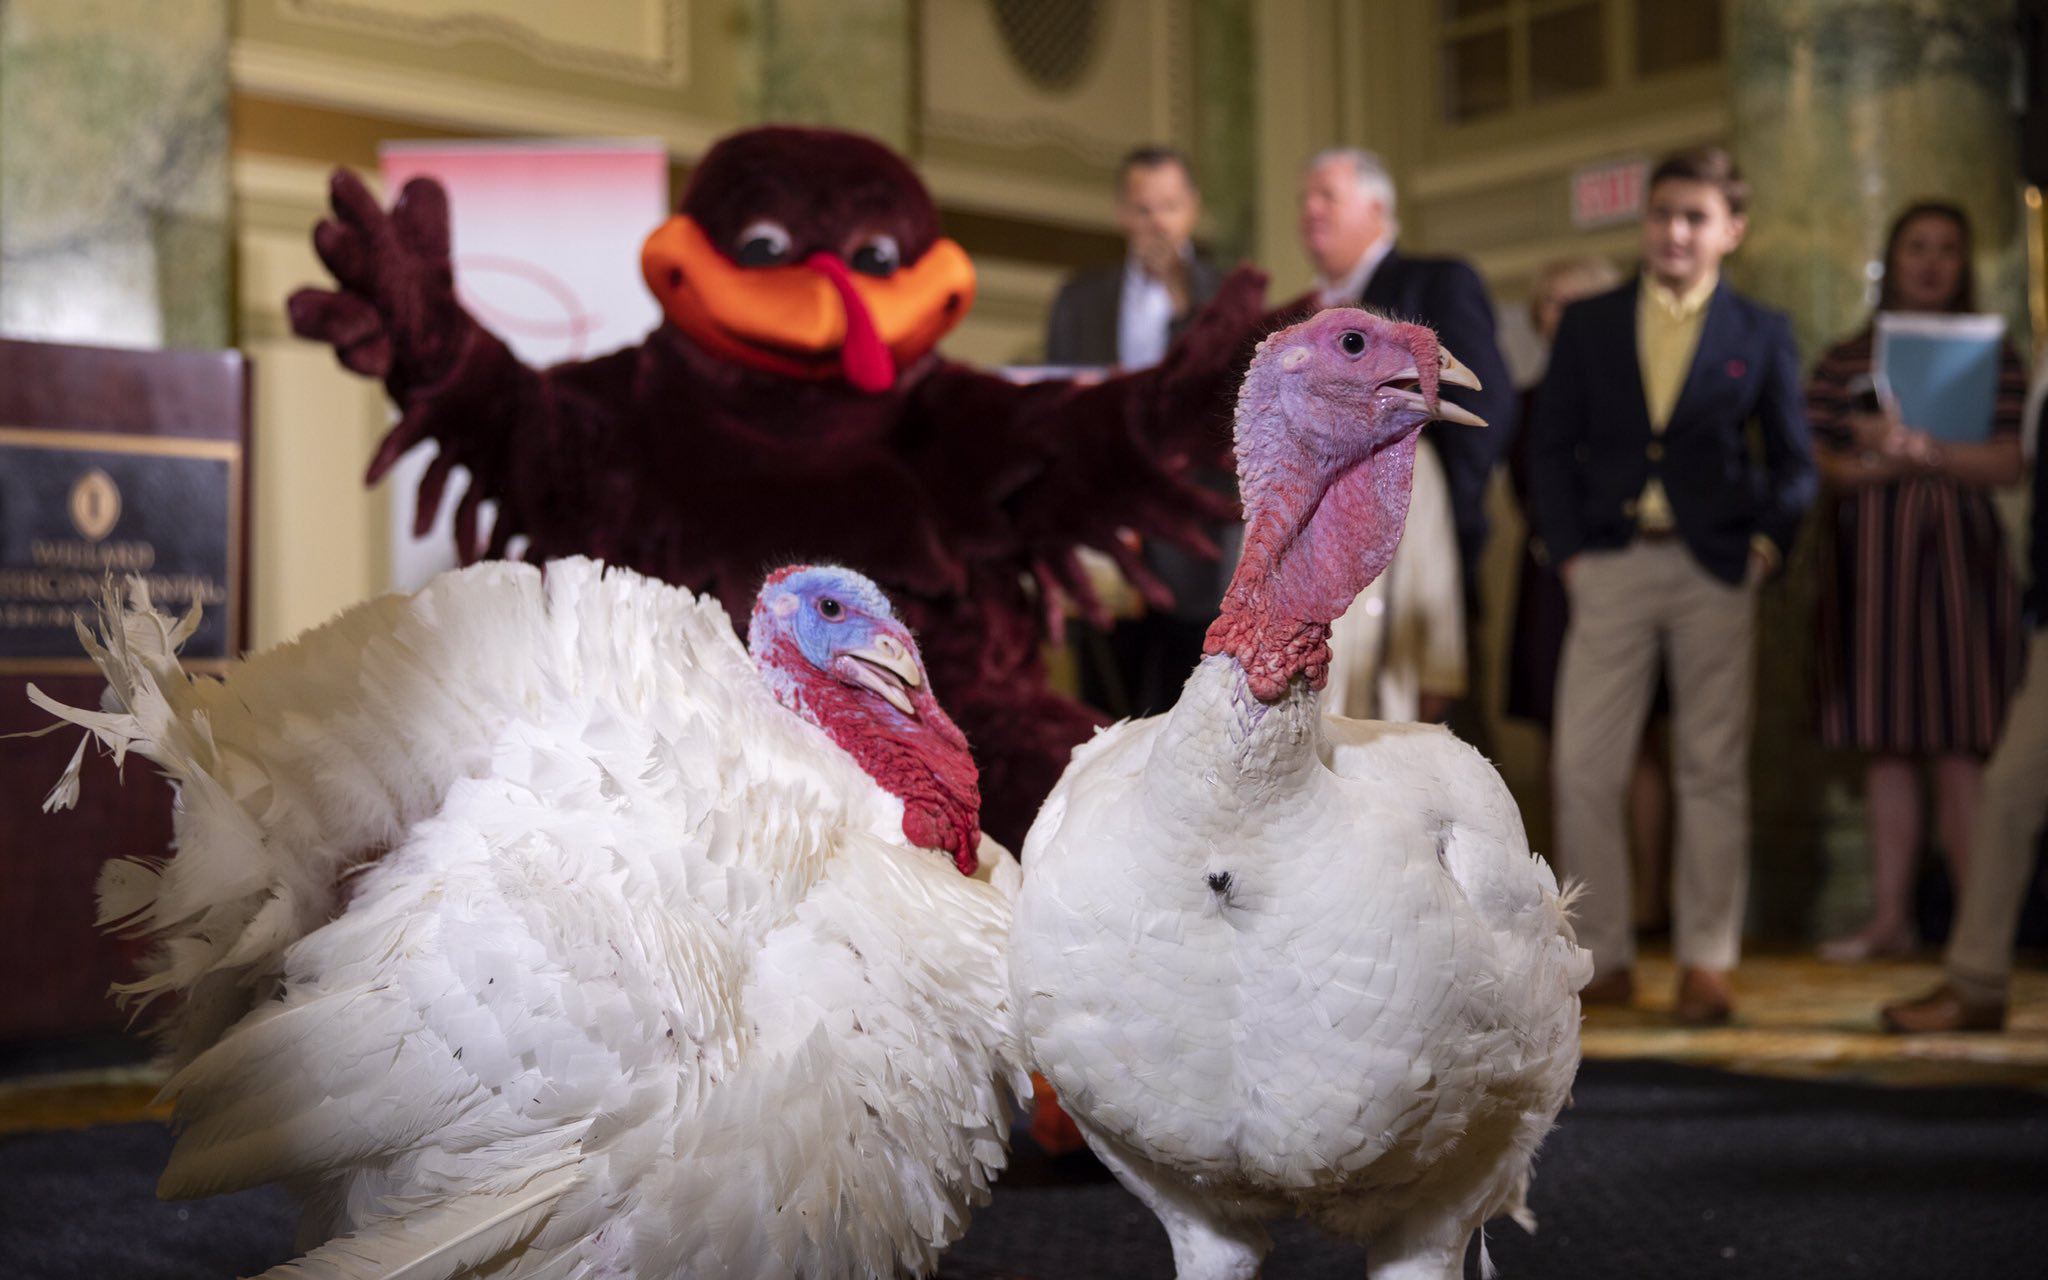 Bread and Butter meet the HokieBird and the public at their press conference. Photo Credit: Virginia Tech